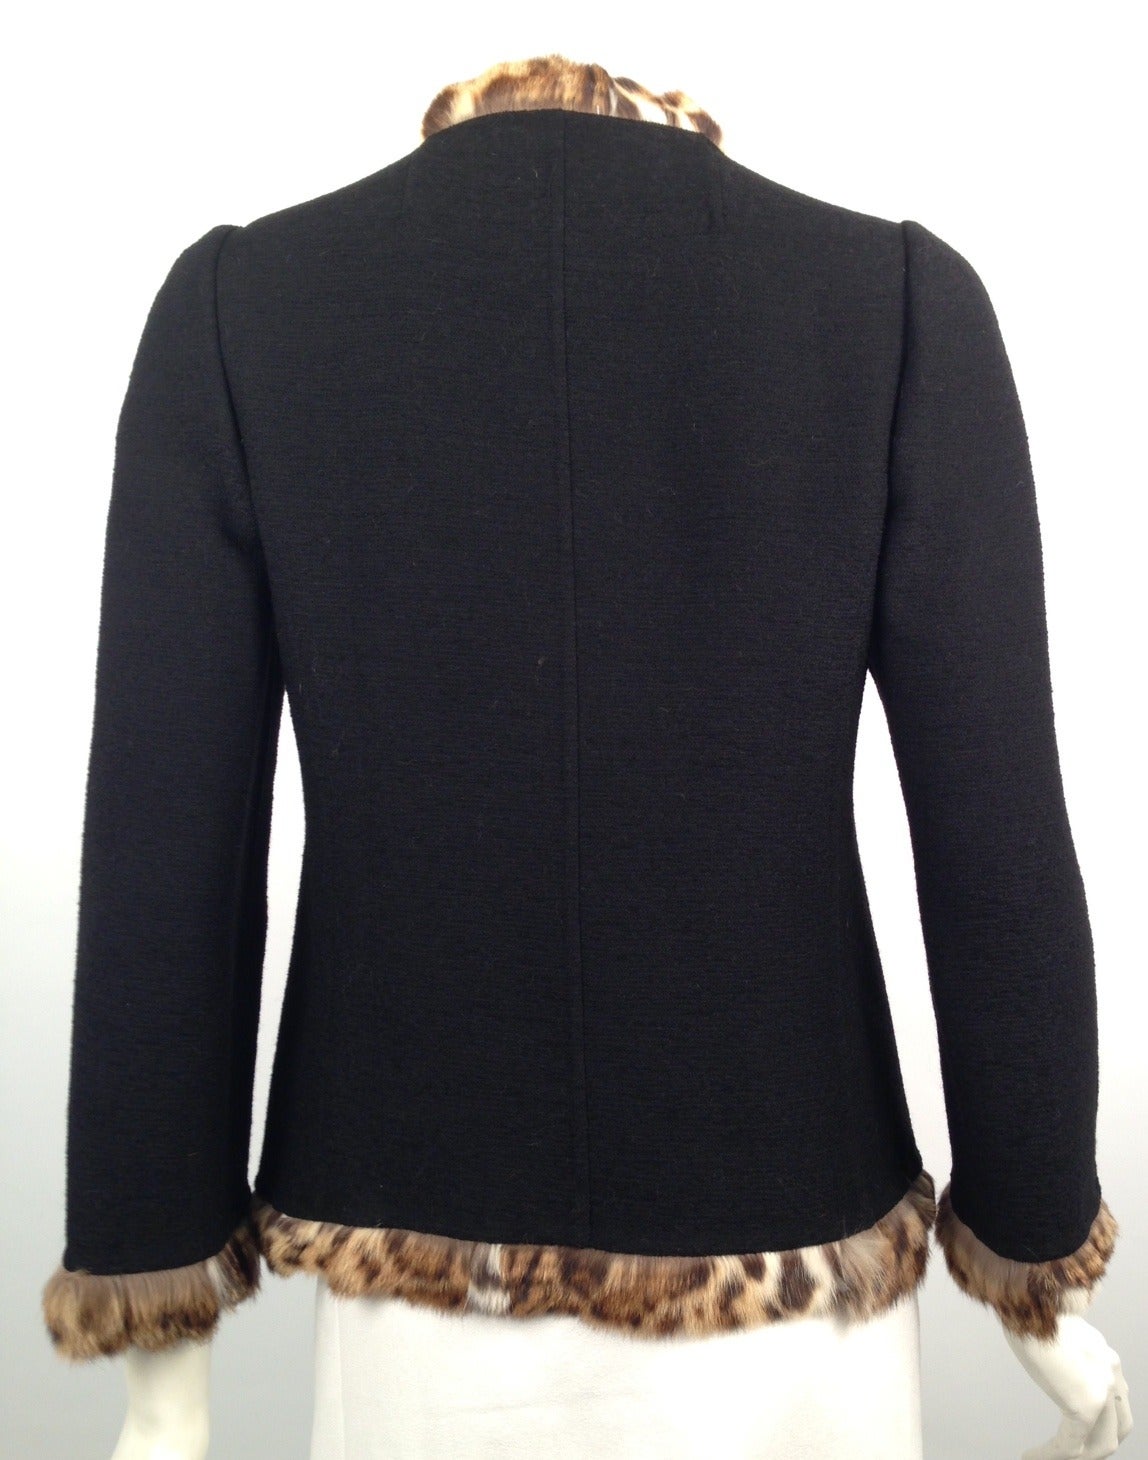 Oscar de la Renta Wool Jacket With Lippi fur trim is an excellent example of this world-renowned designer's passion for fashion!  What would make a simple jacket fabulous?  Fur trim!  Not just any fur...but lippi!   Unlined jacket will quickly